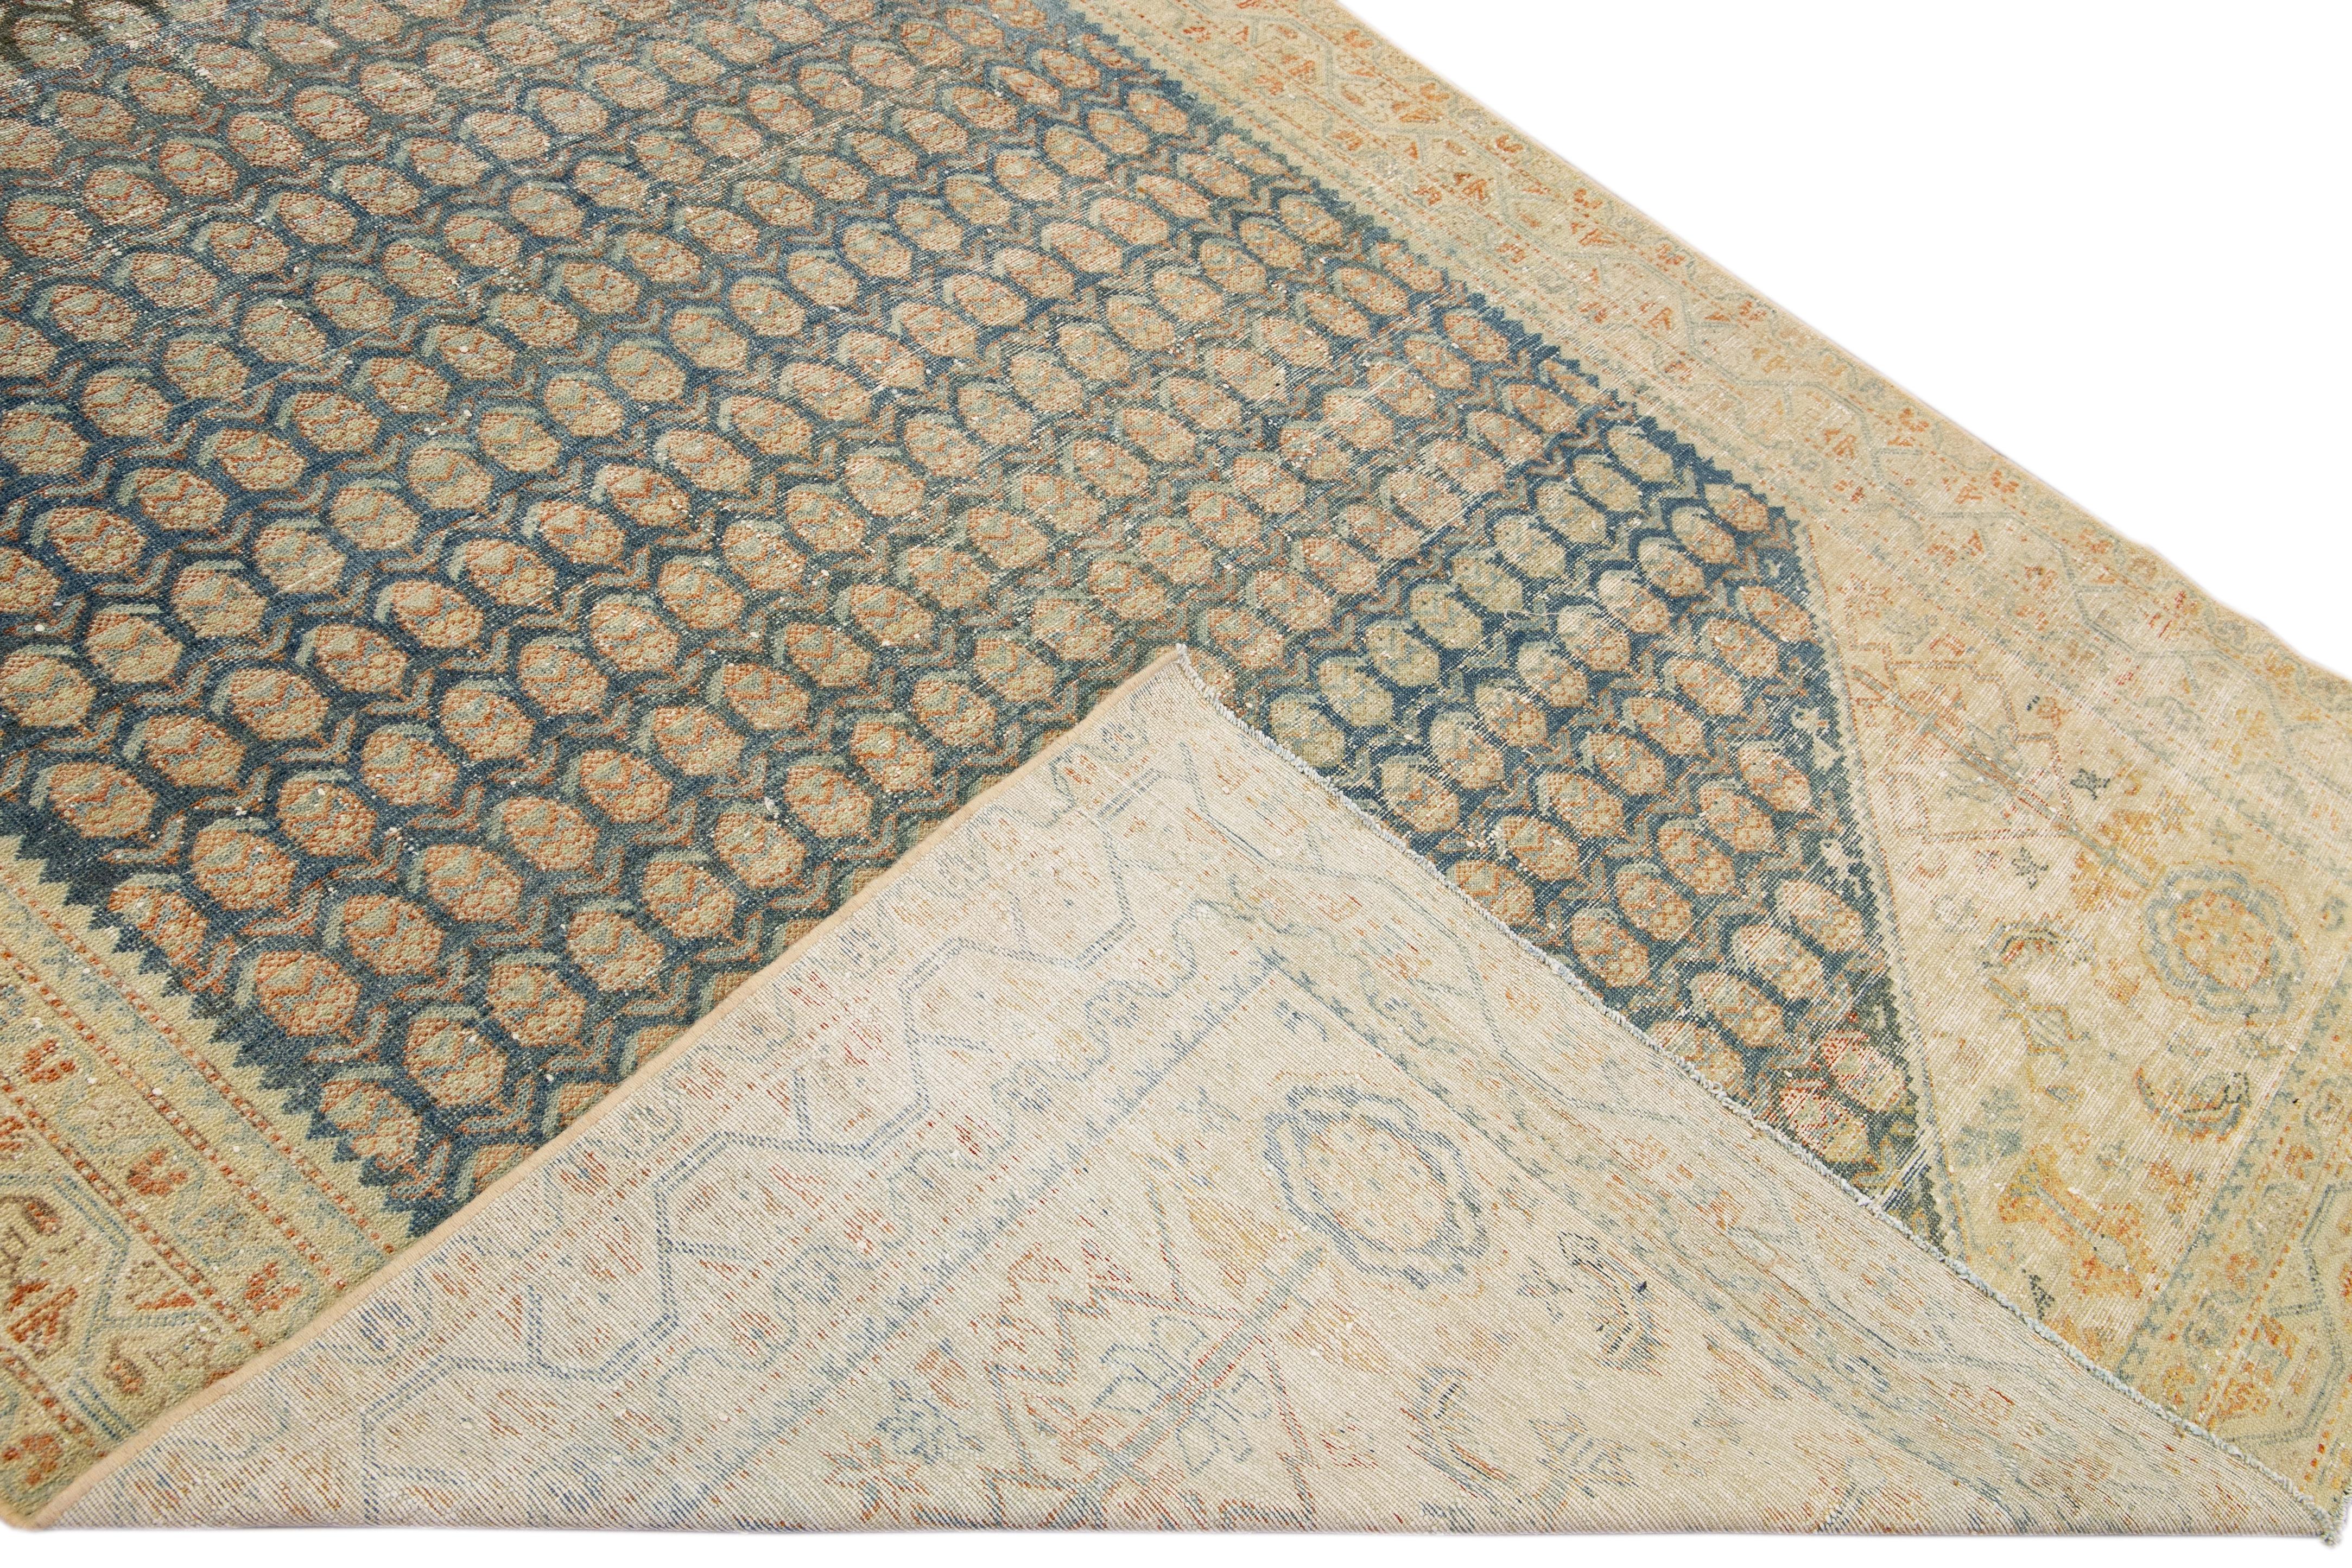 Beautiful antique Malayer hand-knotted wool rug with a beige and blue field. This Malayer piece has an orange accent in a gorgeous all-over palmette pattern design.

This rug measures: 6'8